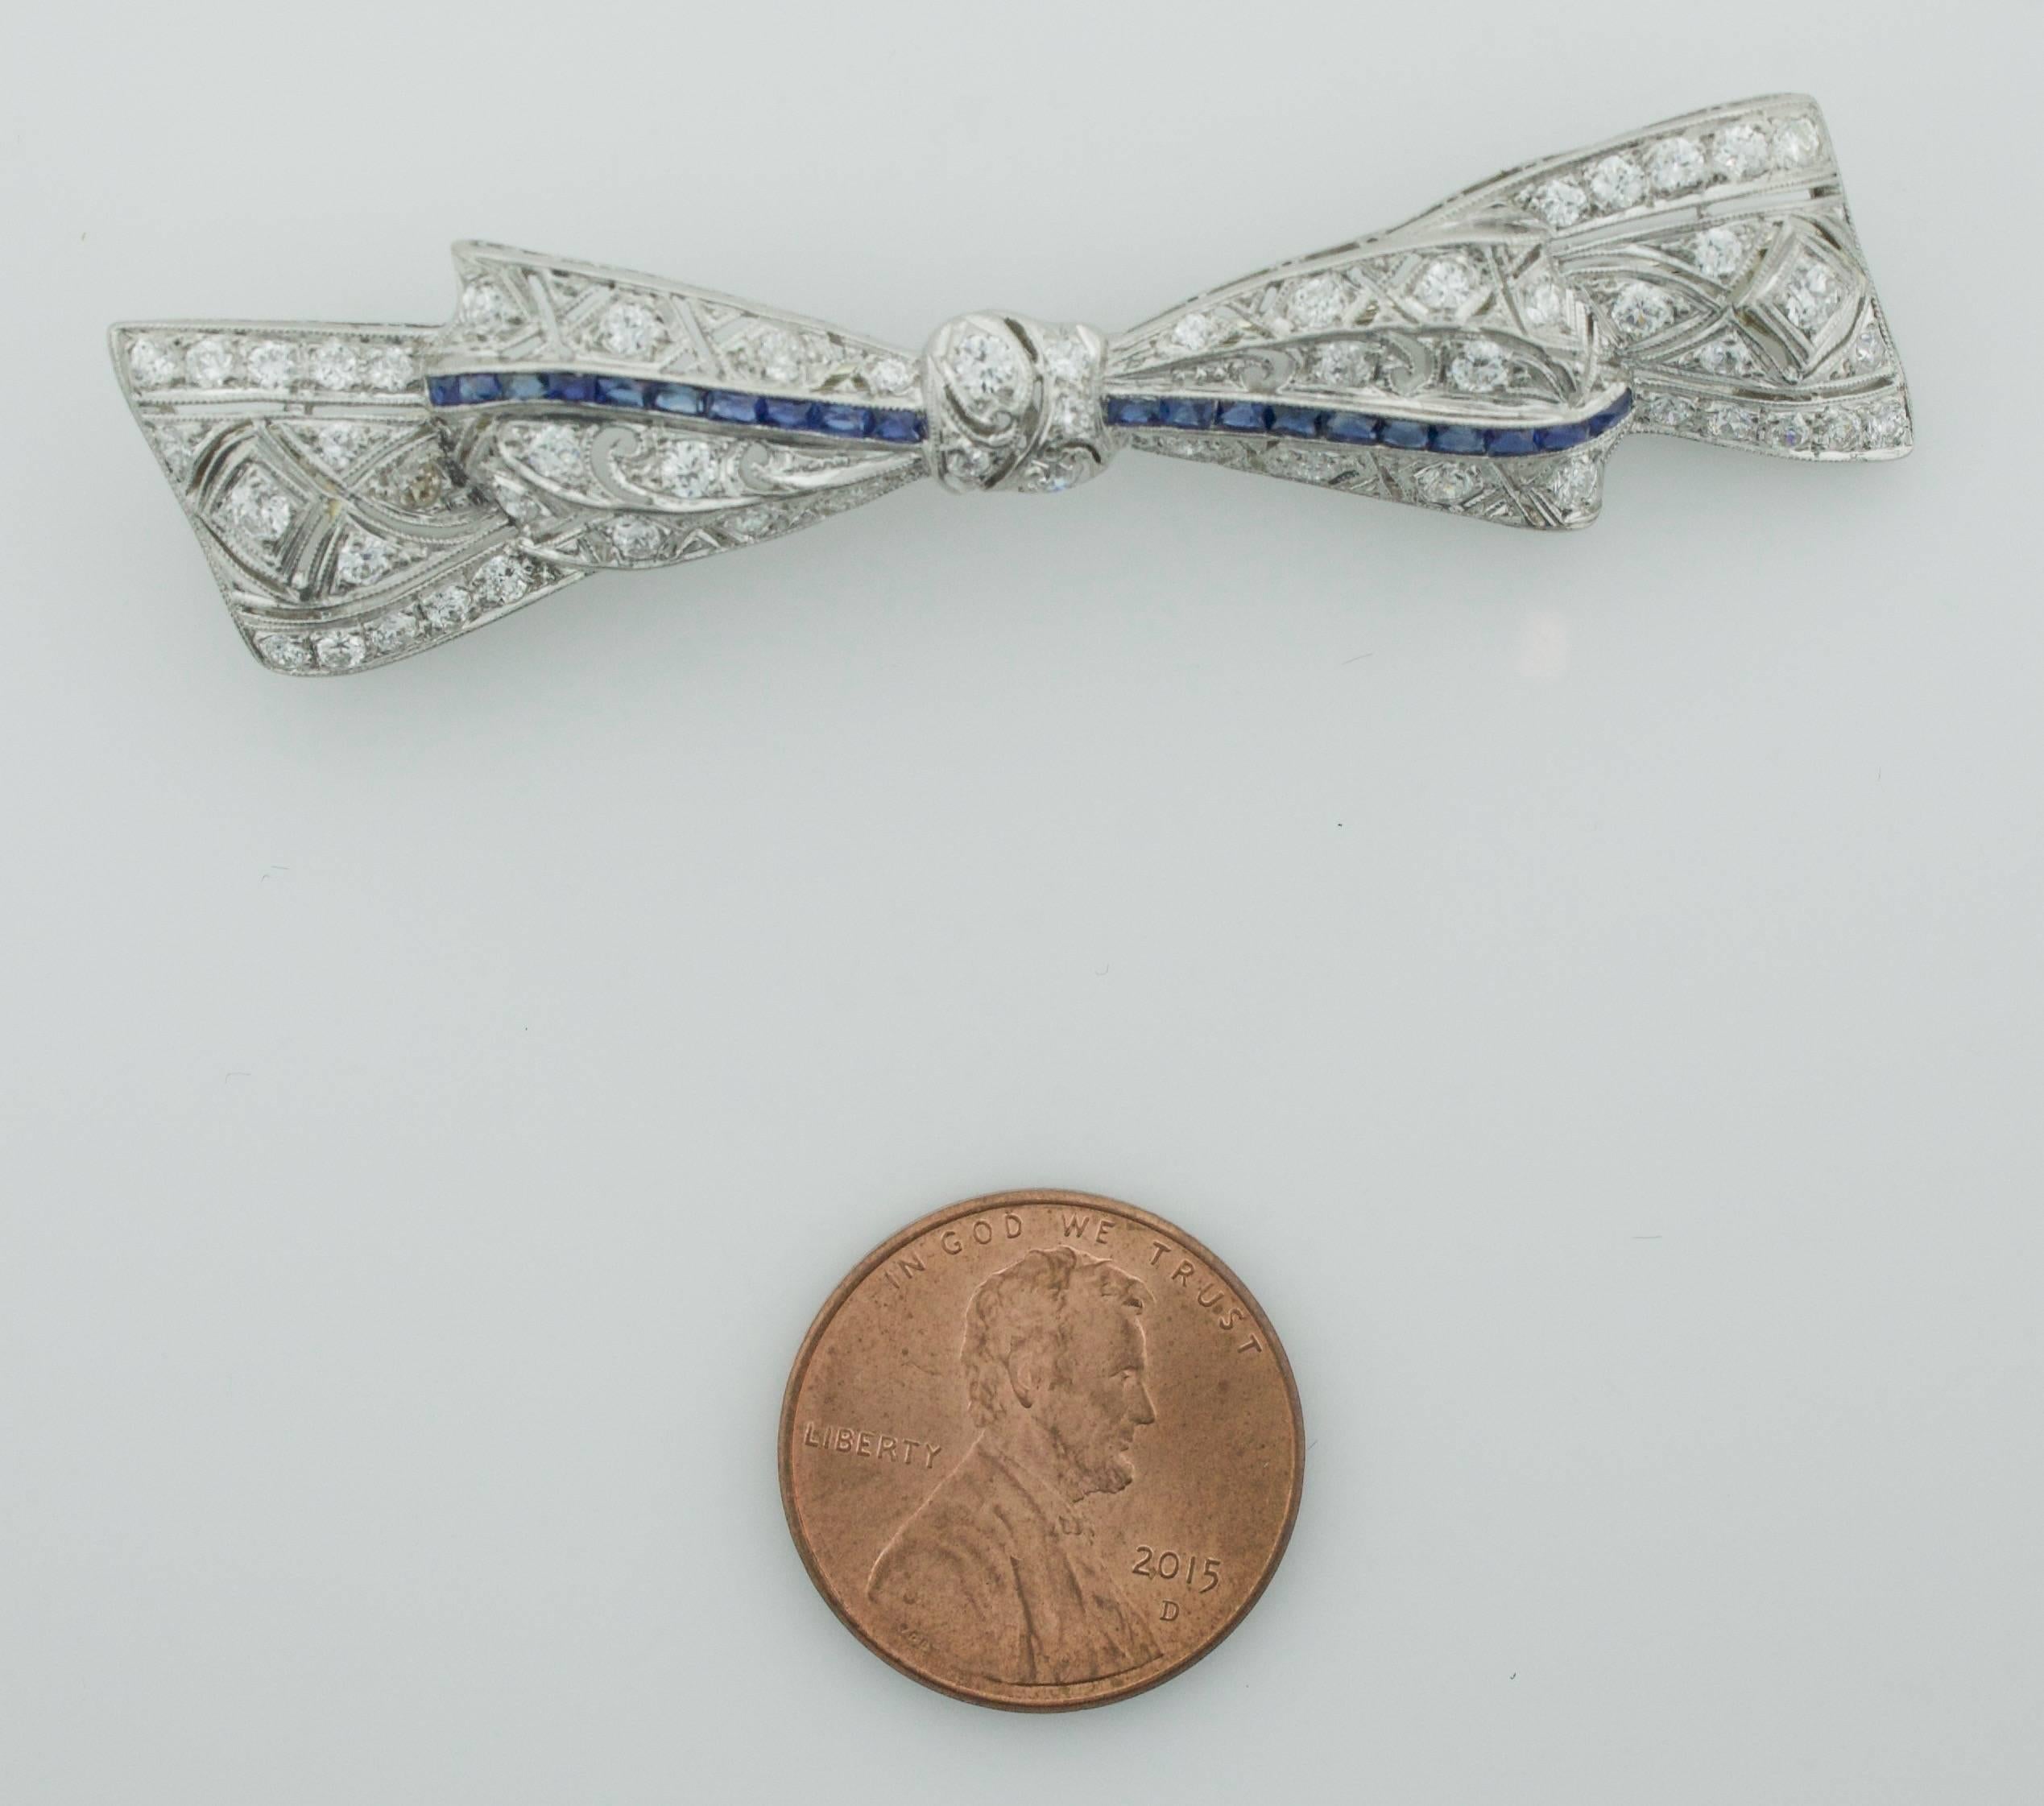 1920's Exquisite Platinum Diamond and Sapphire Bow Brooch 
Fifty Four Old European Diamonds weighing 2.00 carats (approximately)
Twenty Calibrated French Cut Sapphire weighing .70 carats (approximately)

Known as the 